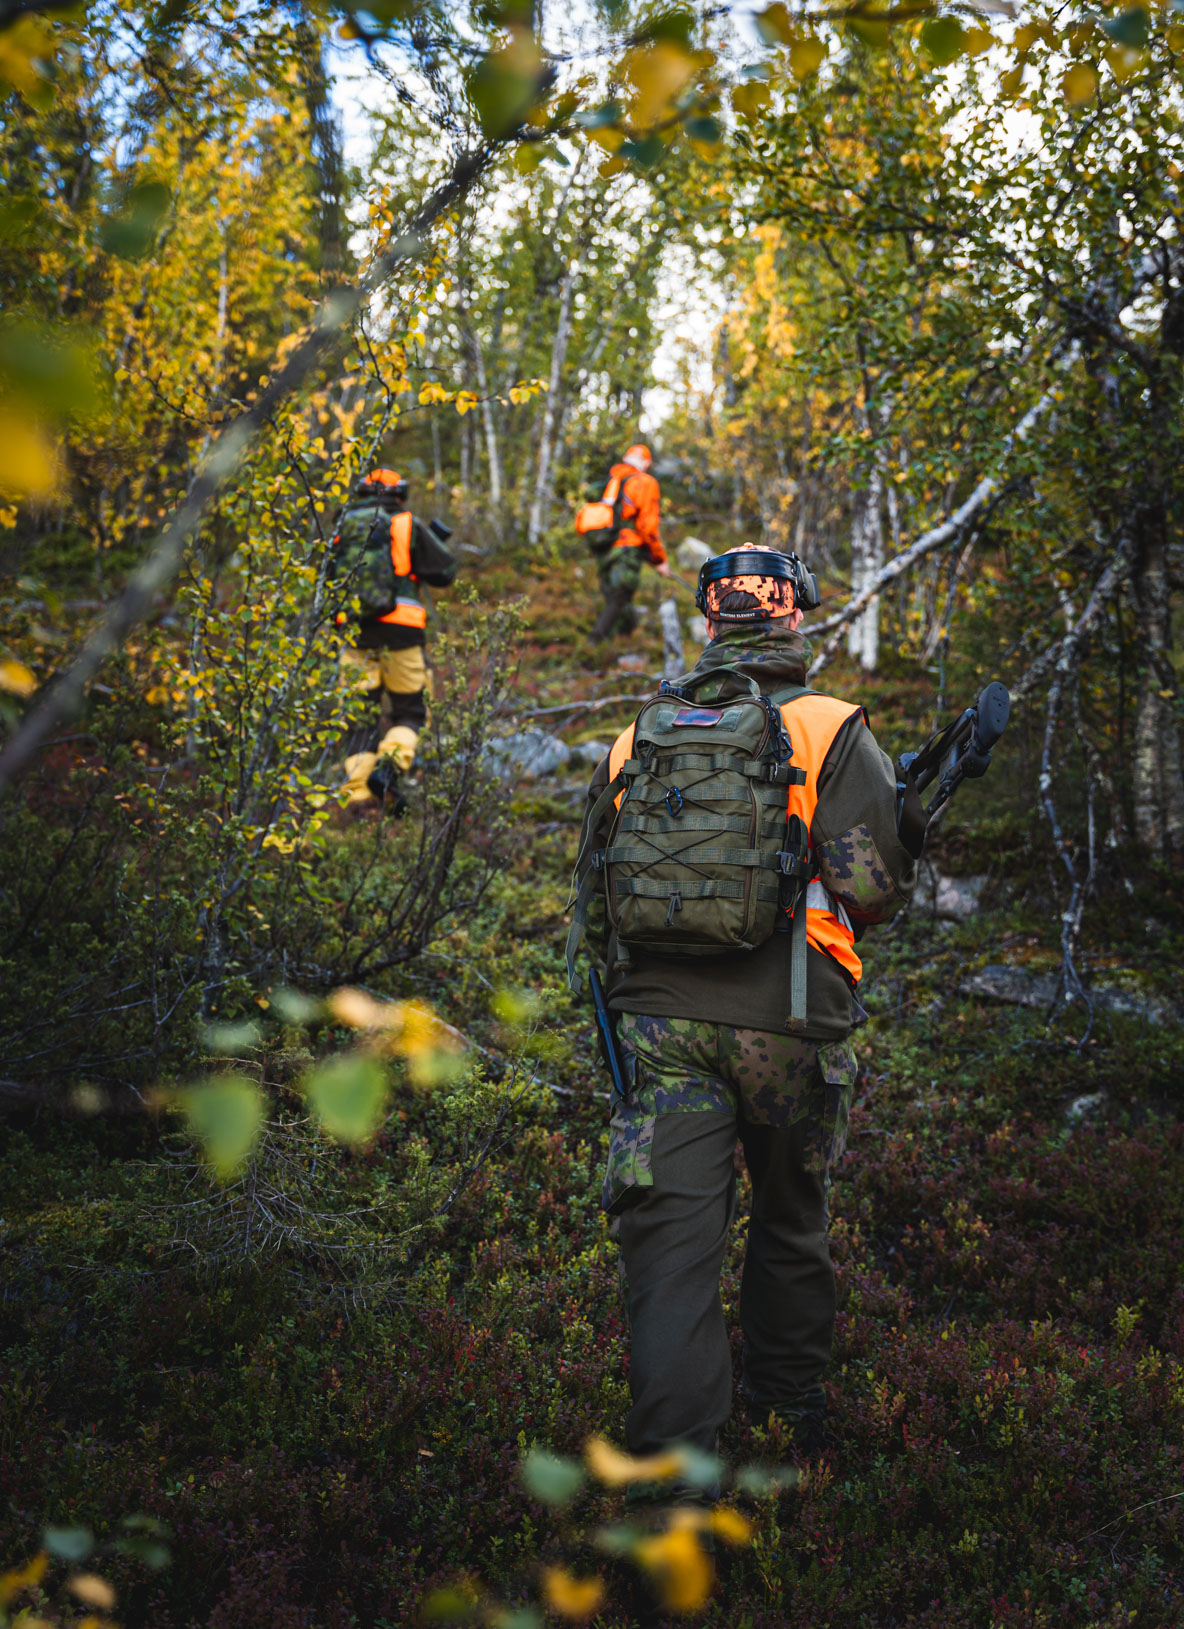 Three moose hunters advancing in the shrubbery in Lapland